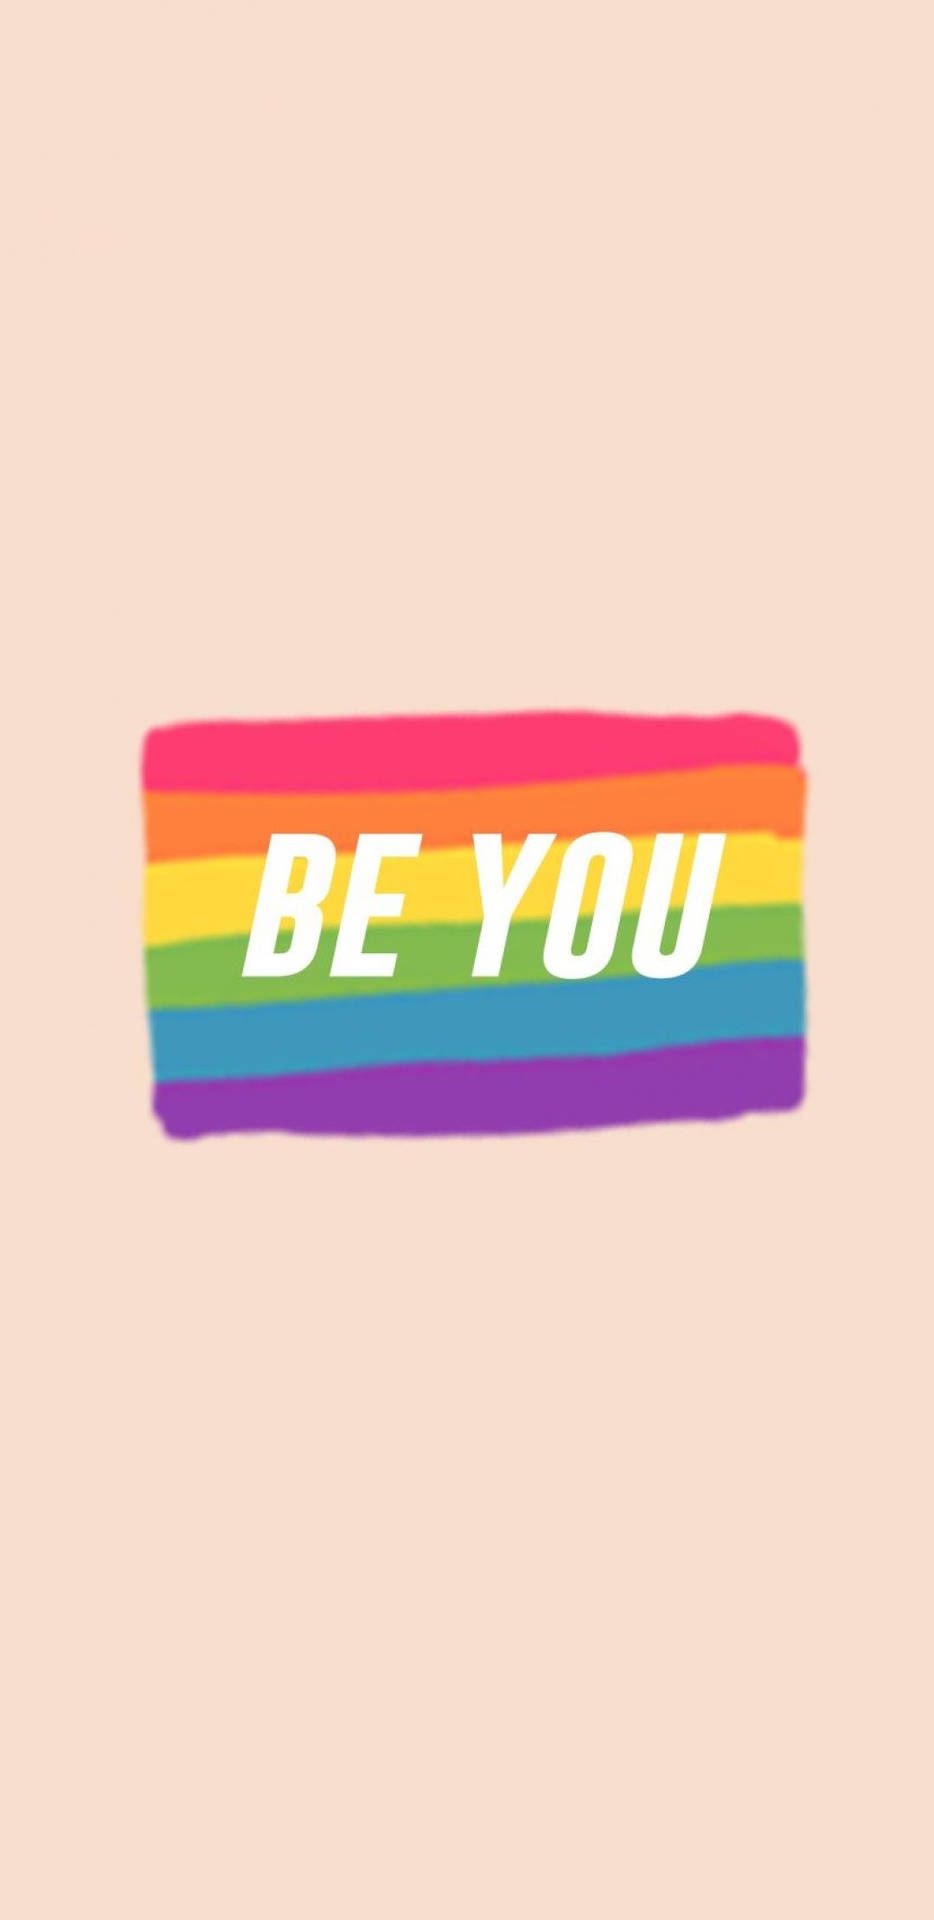 A rainbow colored be you sticker on an orange background - LGBT